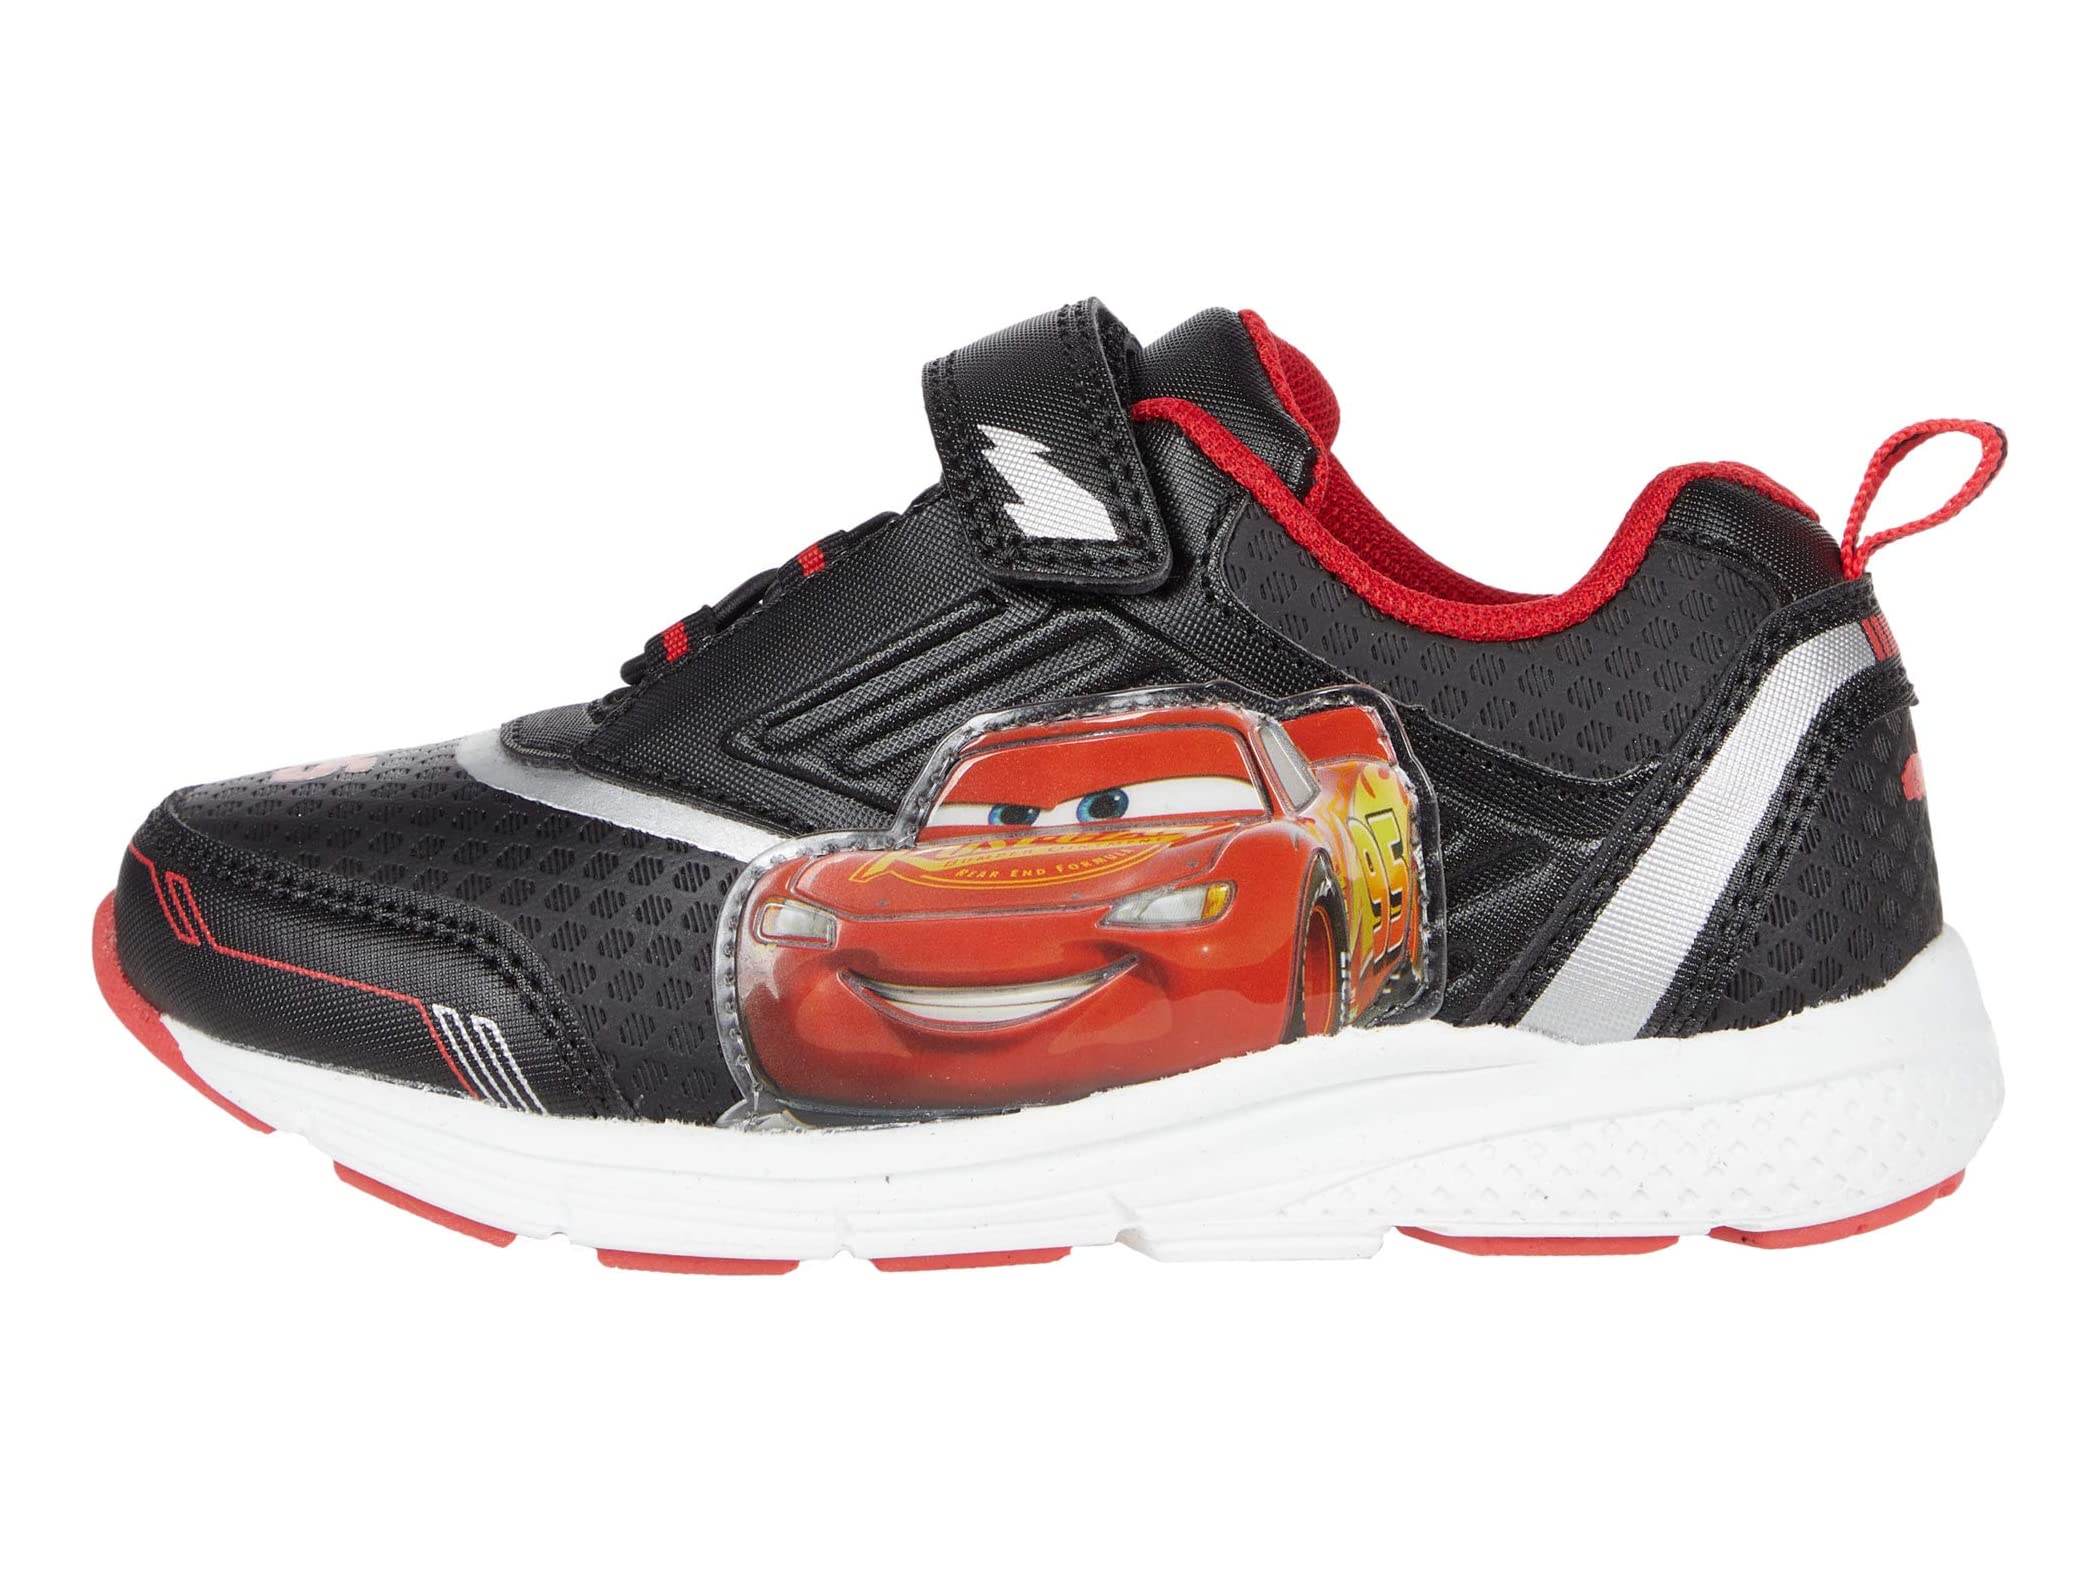 Disney Cars Boys Sneakers Lightning McQueen Toddler Light-Up Shoes, 7-12 - image 2 of 7